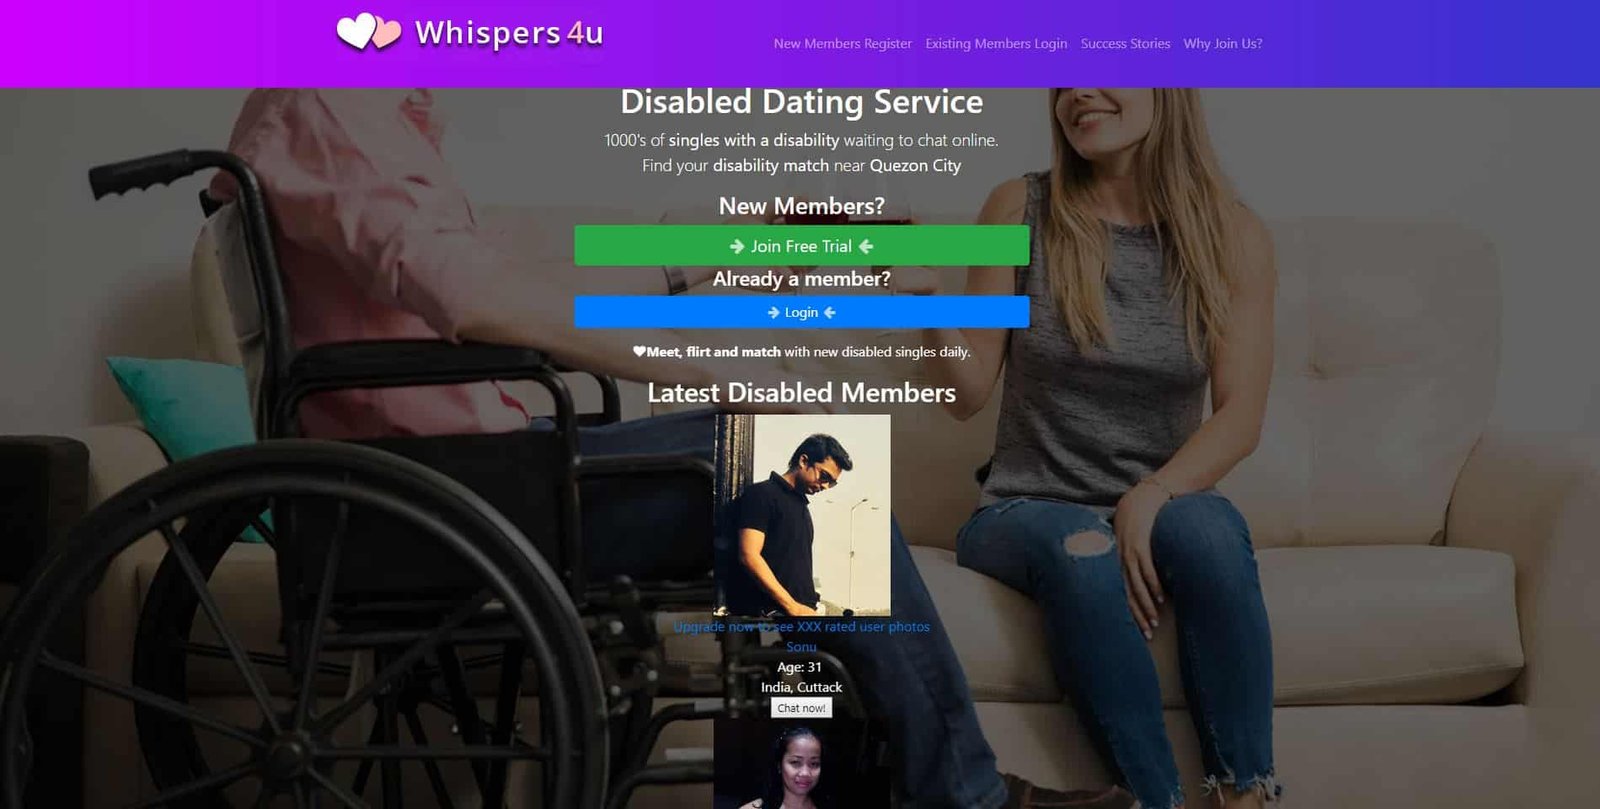 Handicapped Online Dating - New Online Dating Site for People with Disabilities